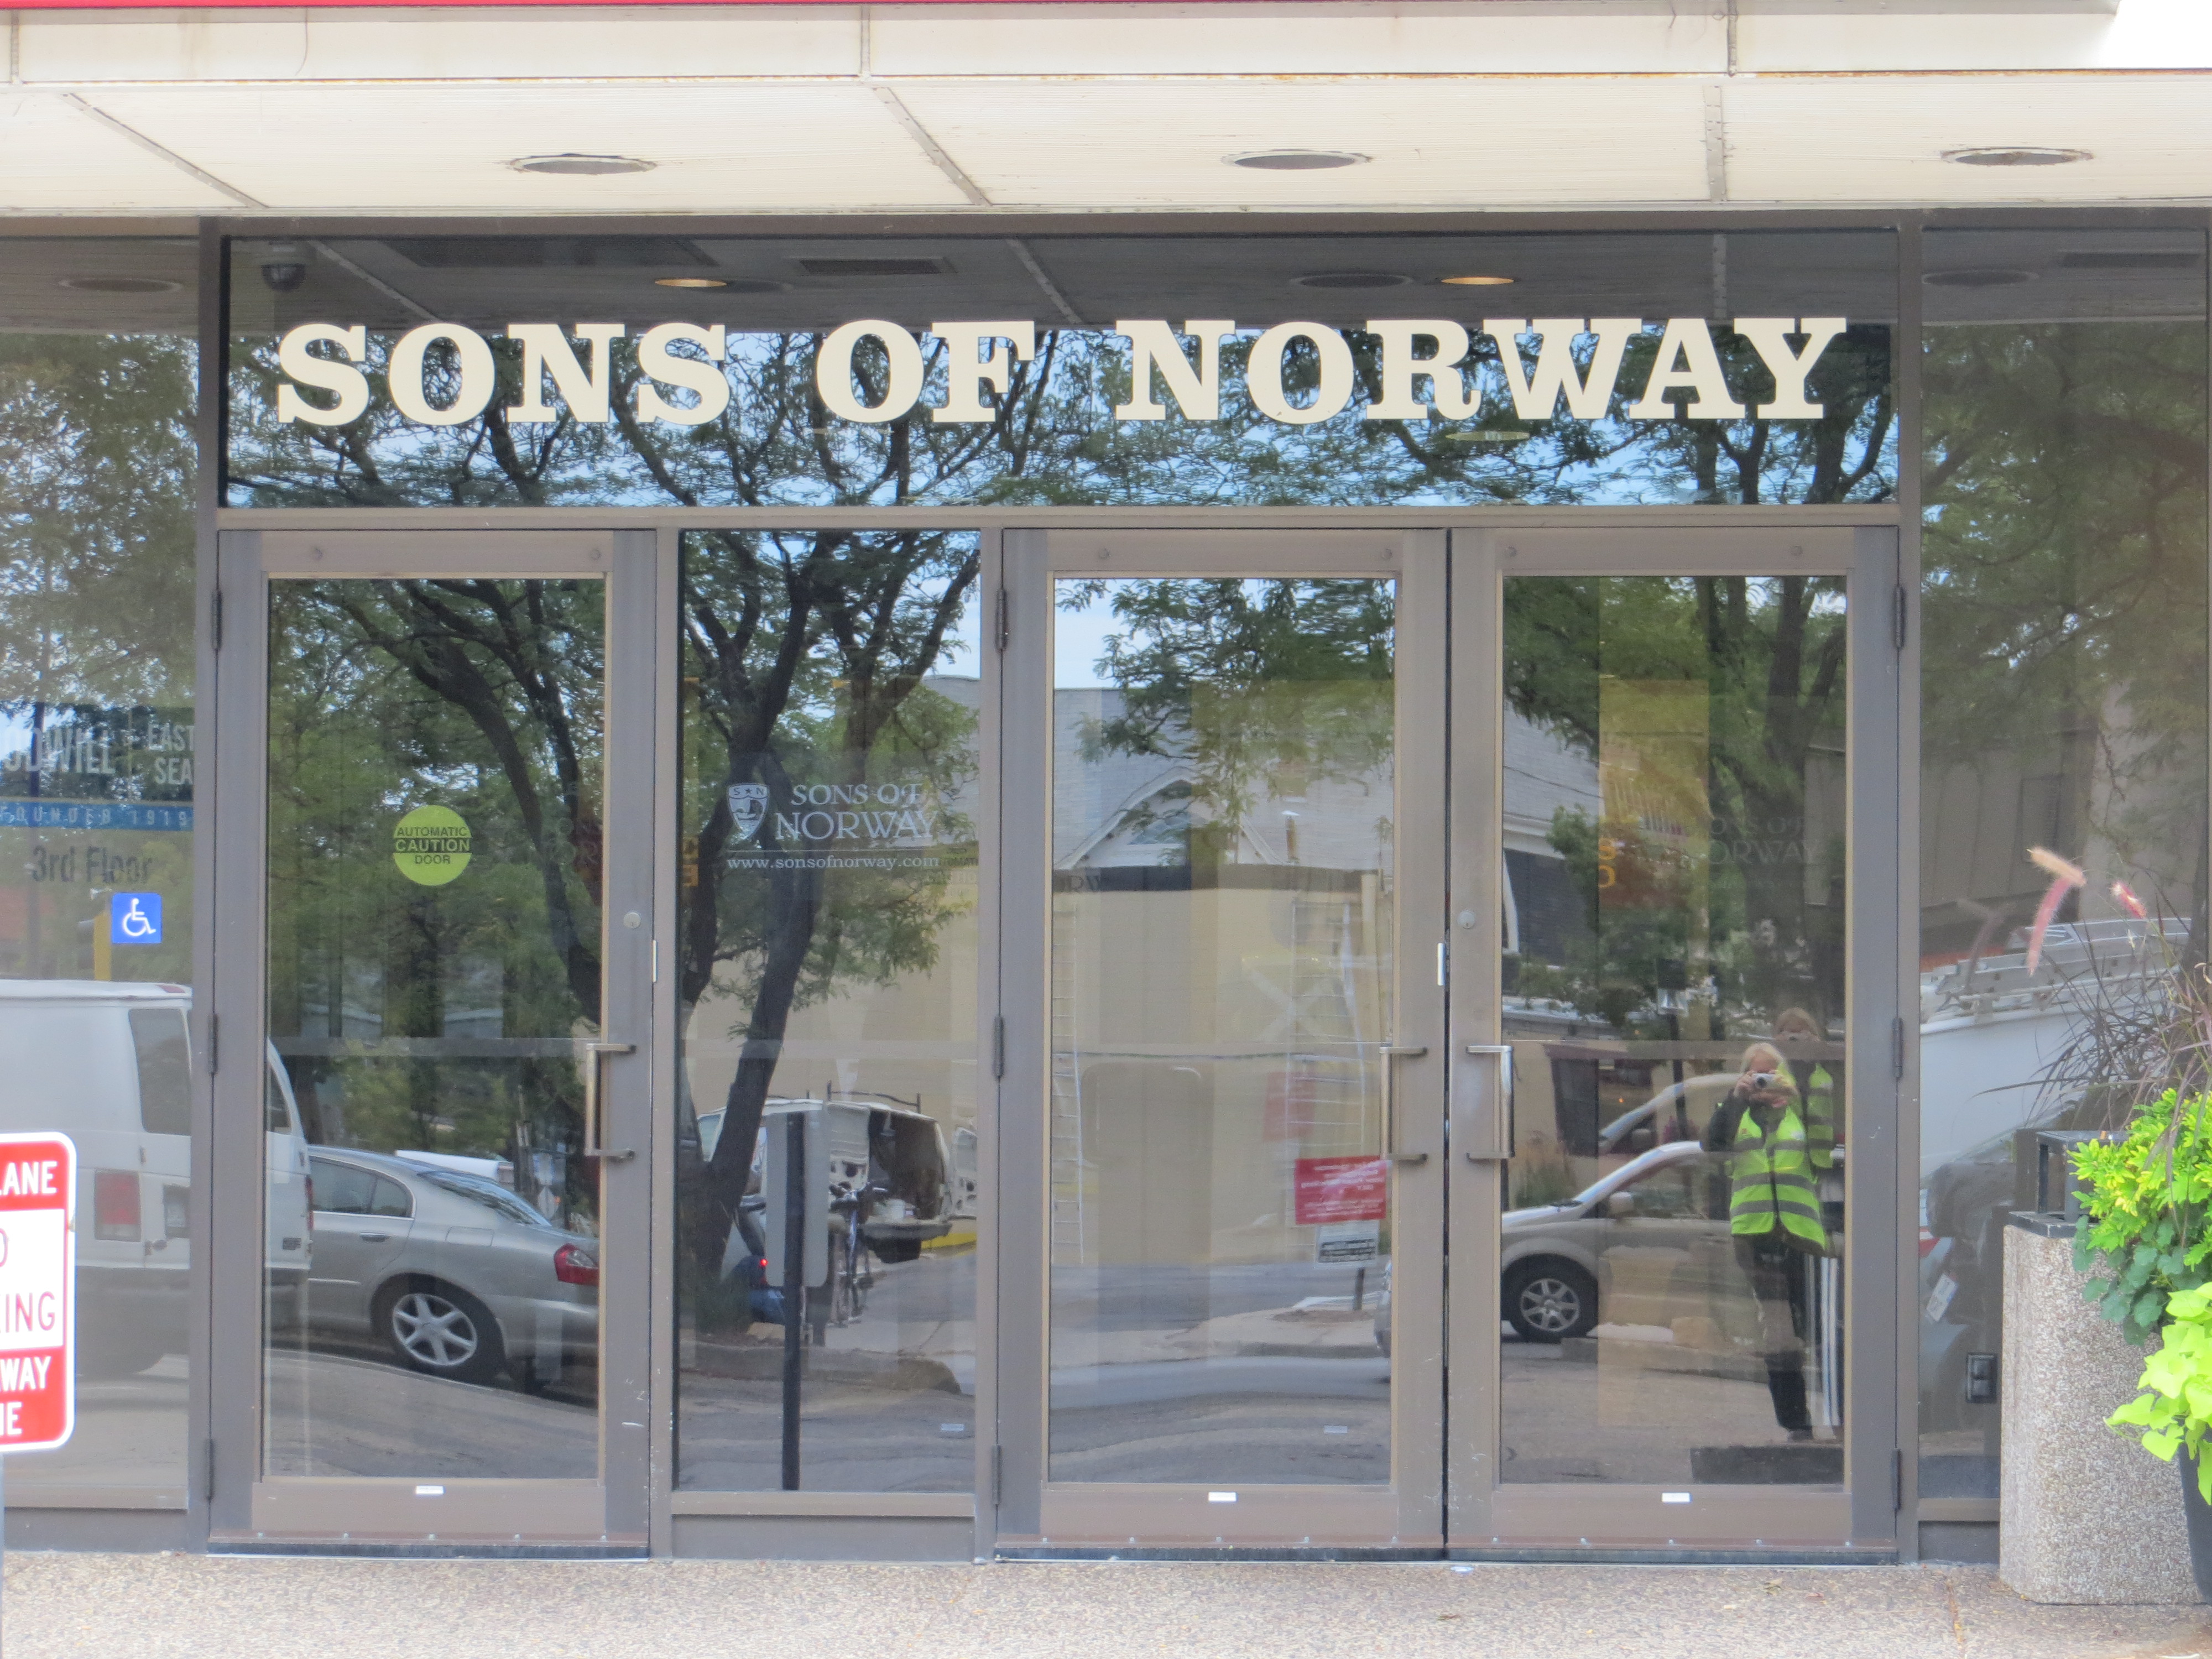 SONS OF NORWAY